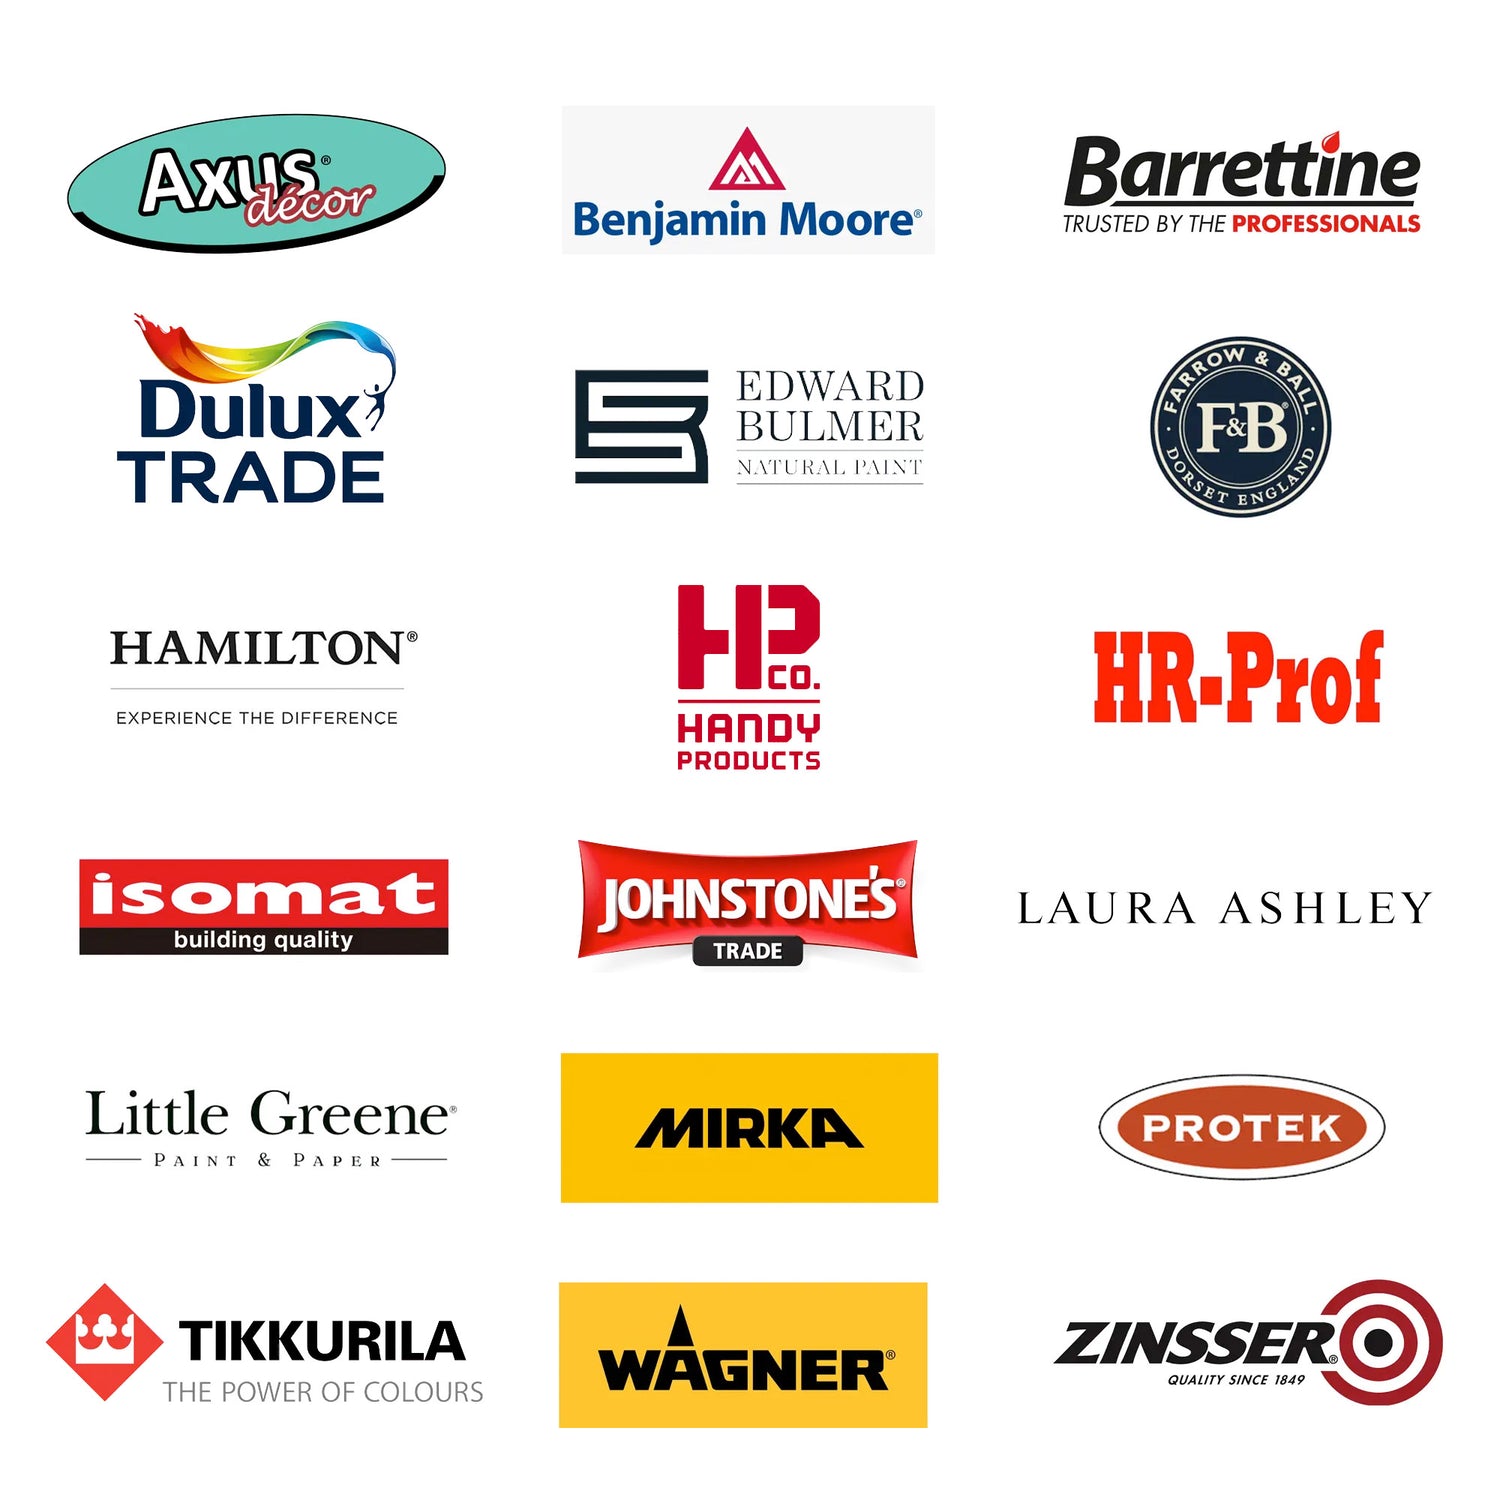 Stocking the Finest Brands for over 30 Years